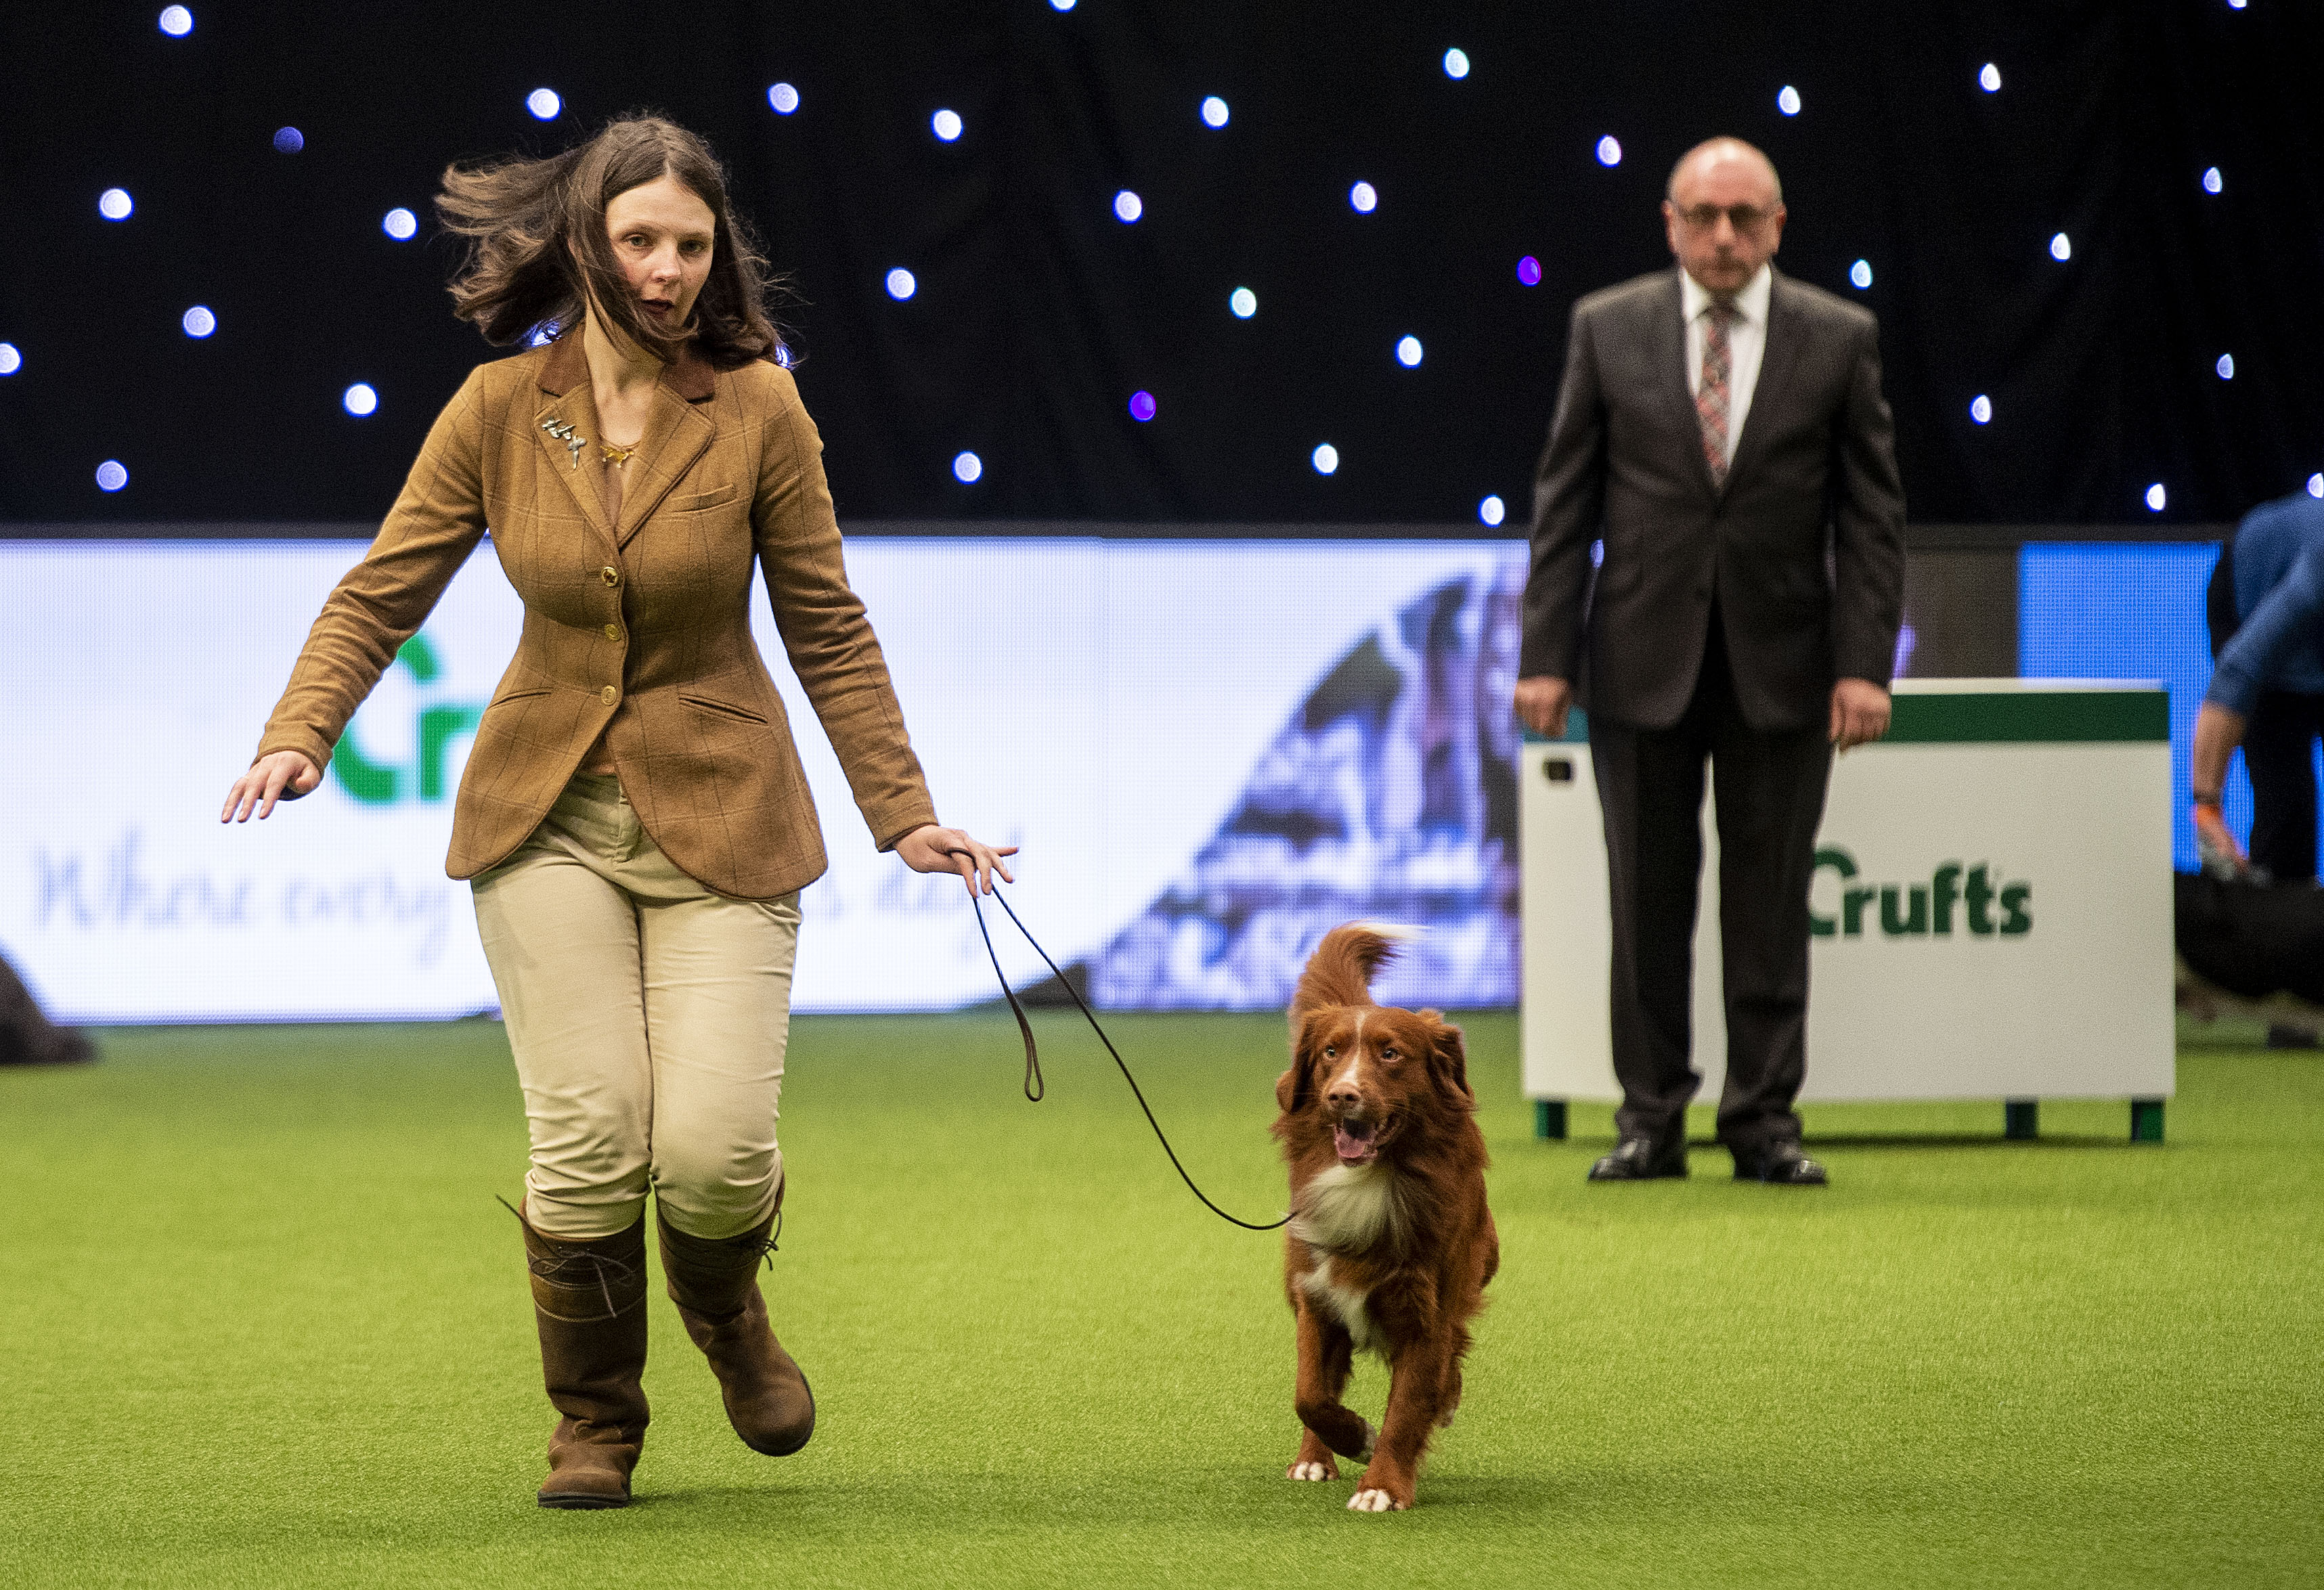 crufts ticket prices